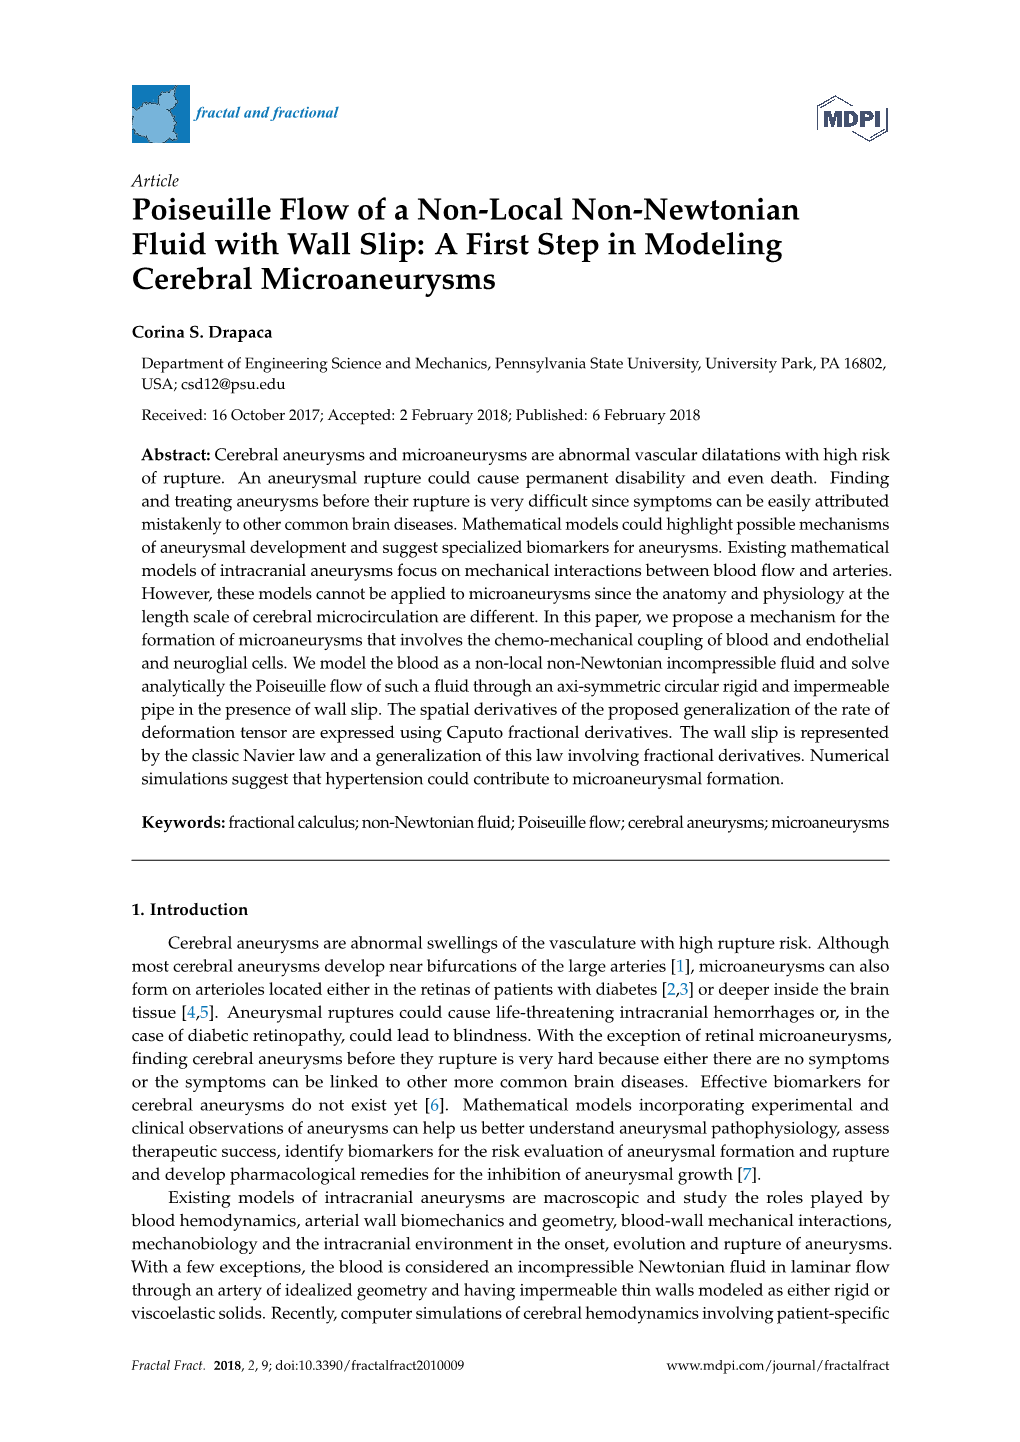 Poiseuille Flow of a Non-Local Non-Newtonian Fluid with Wall Slip: a First Step in Modeling Cerebral Microaneurysms